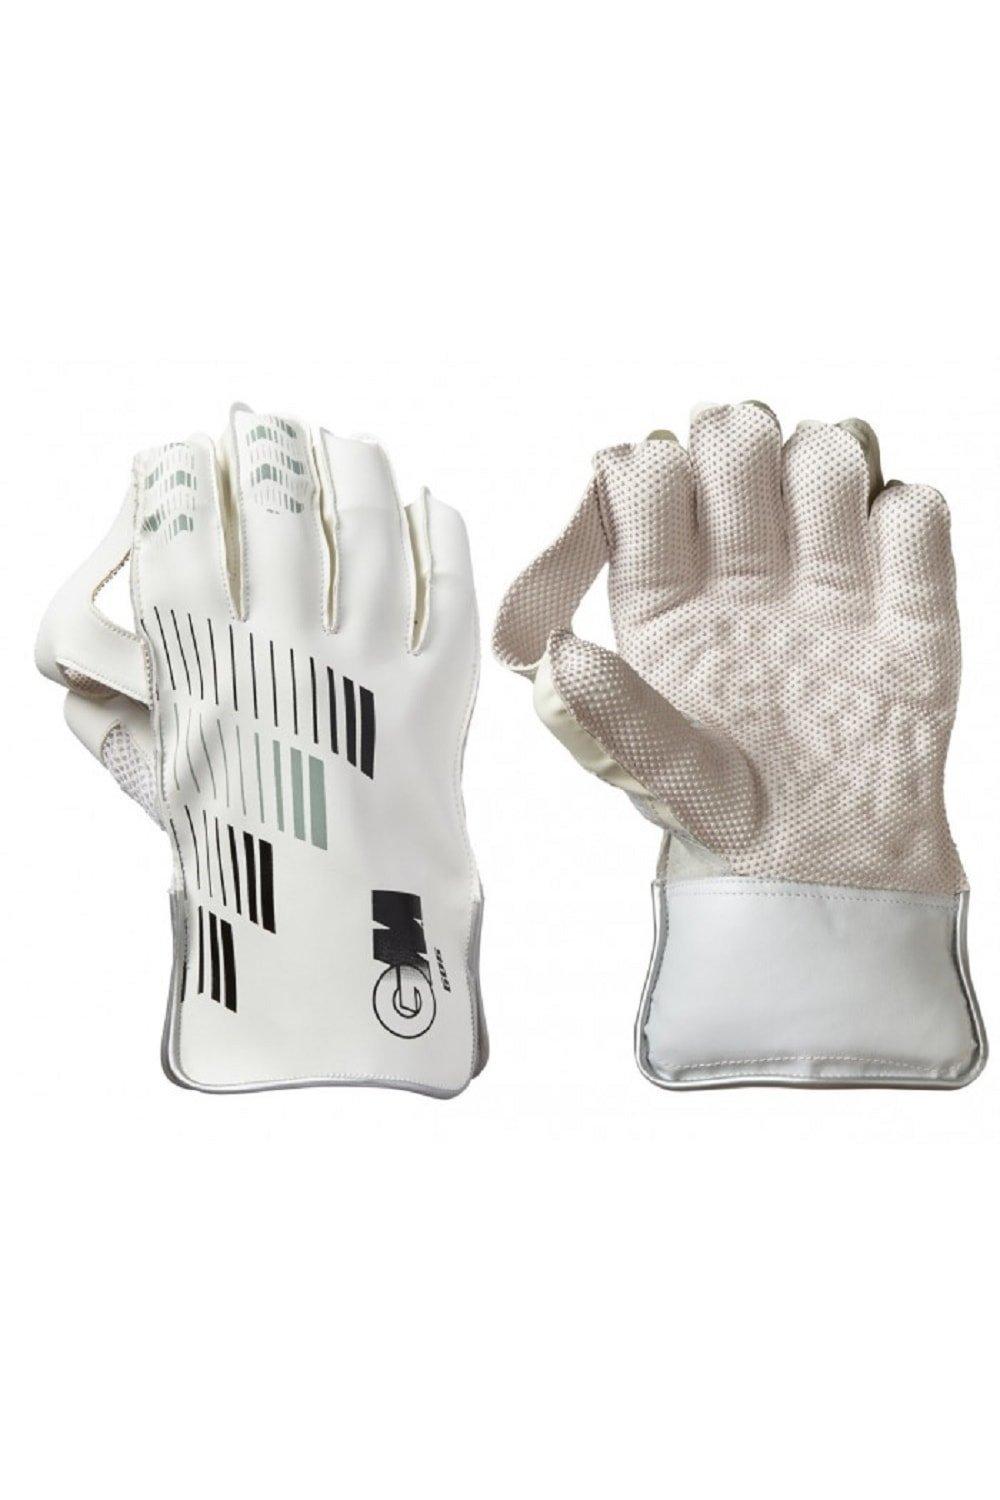 606 Leather Palm Wicket Keeper Gloves